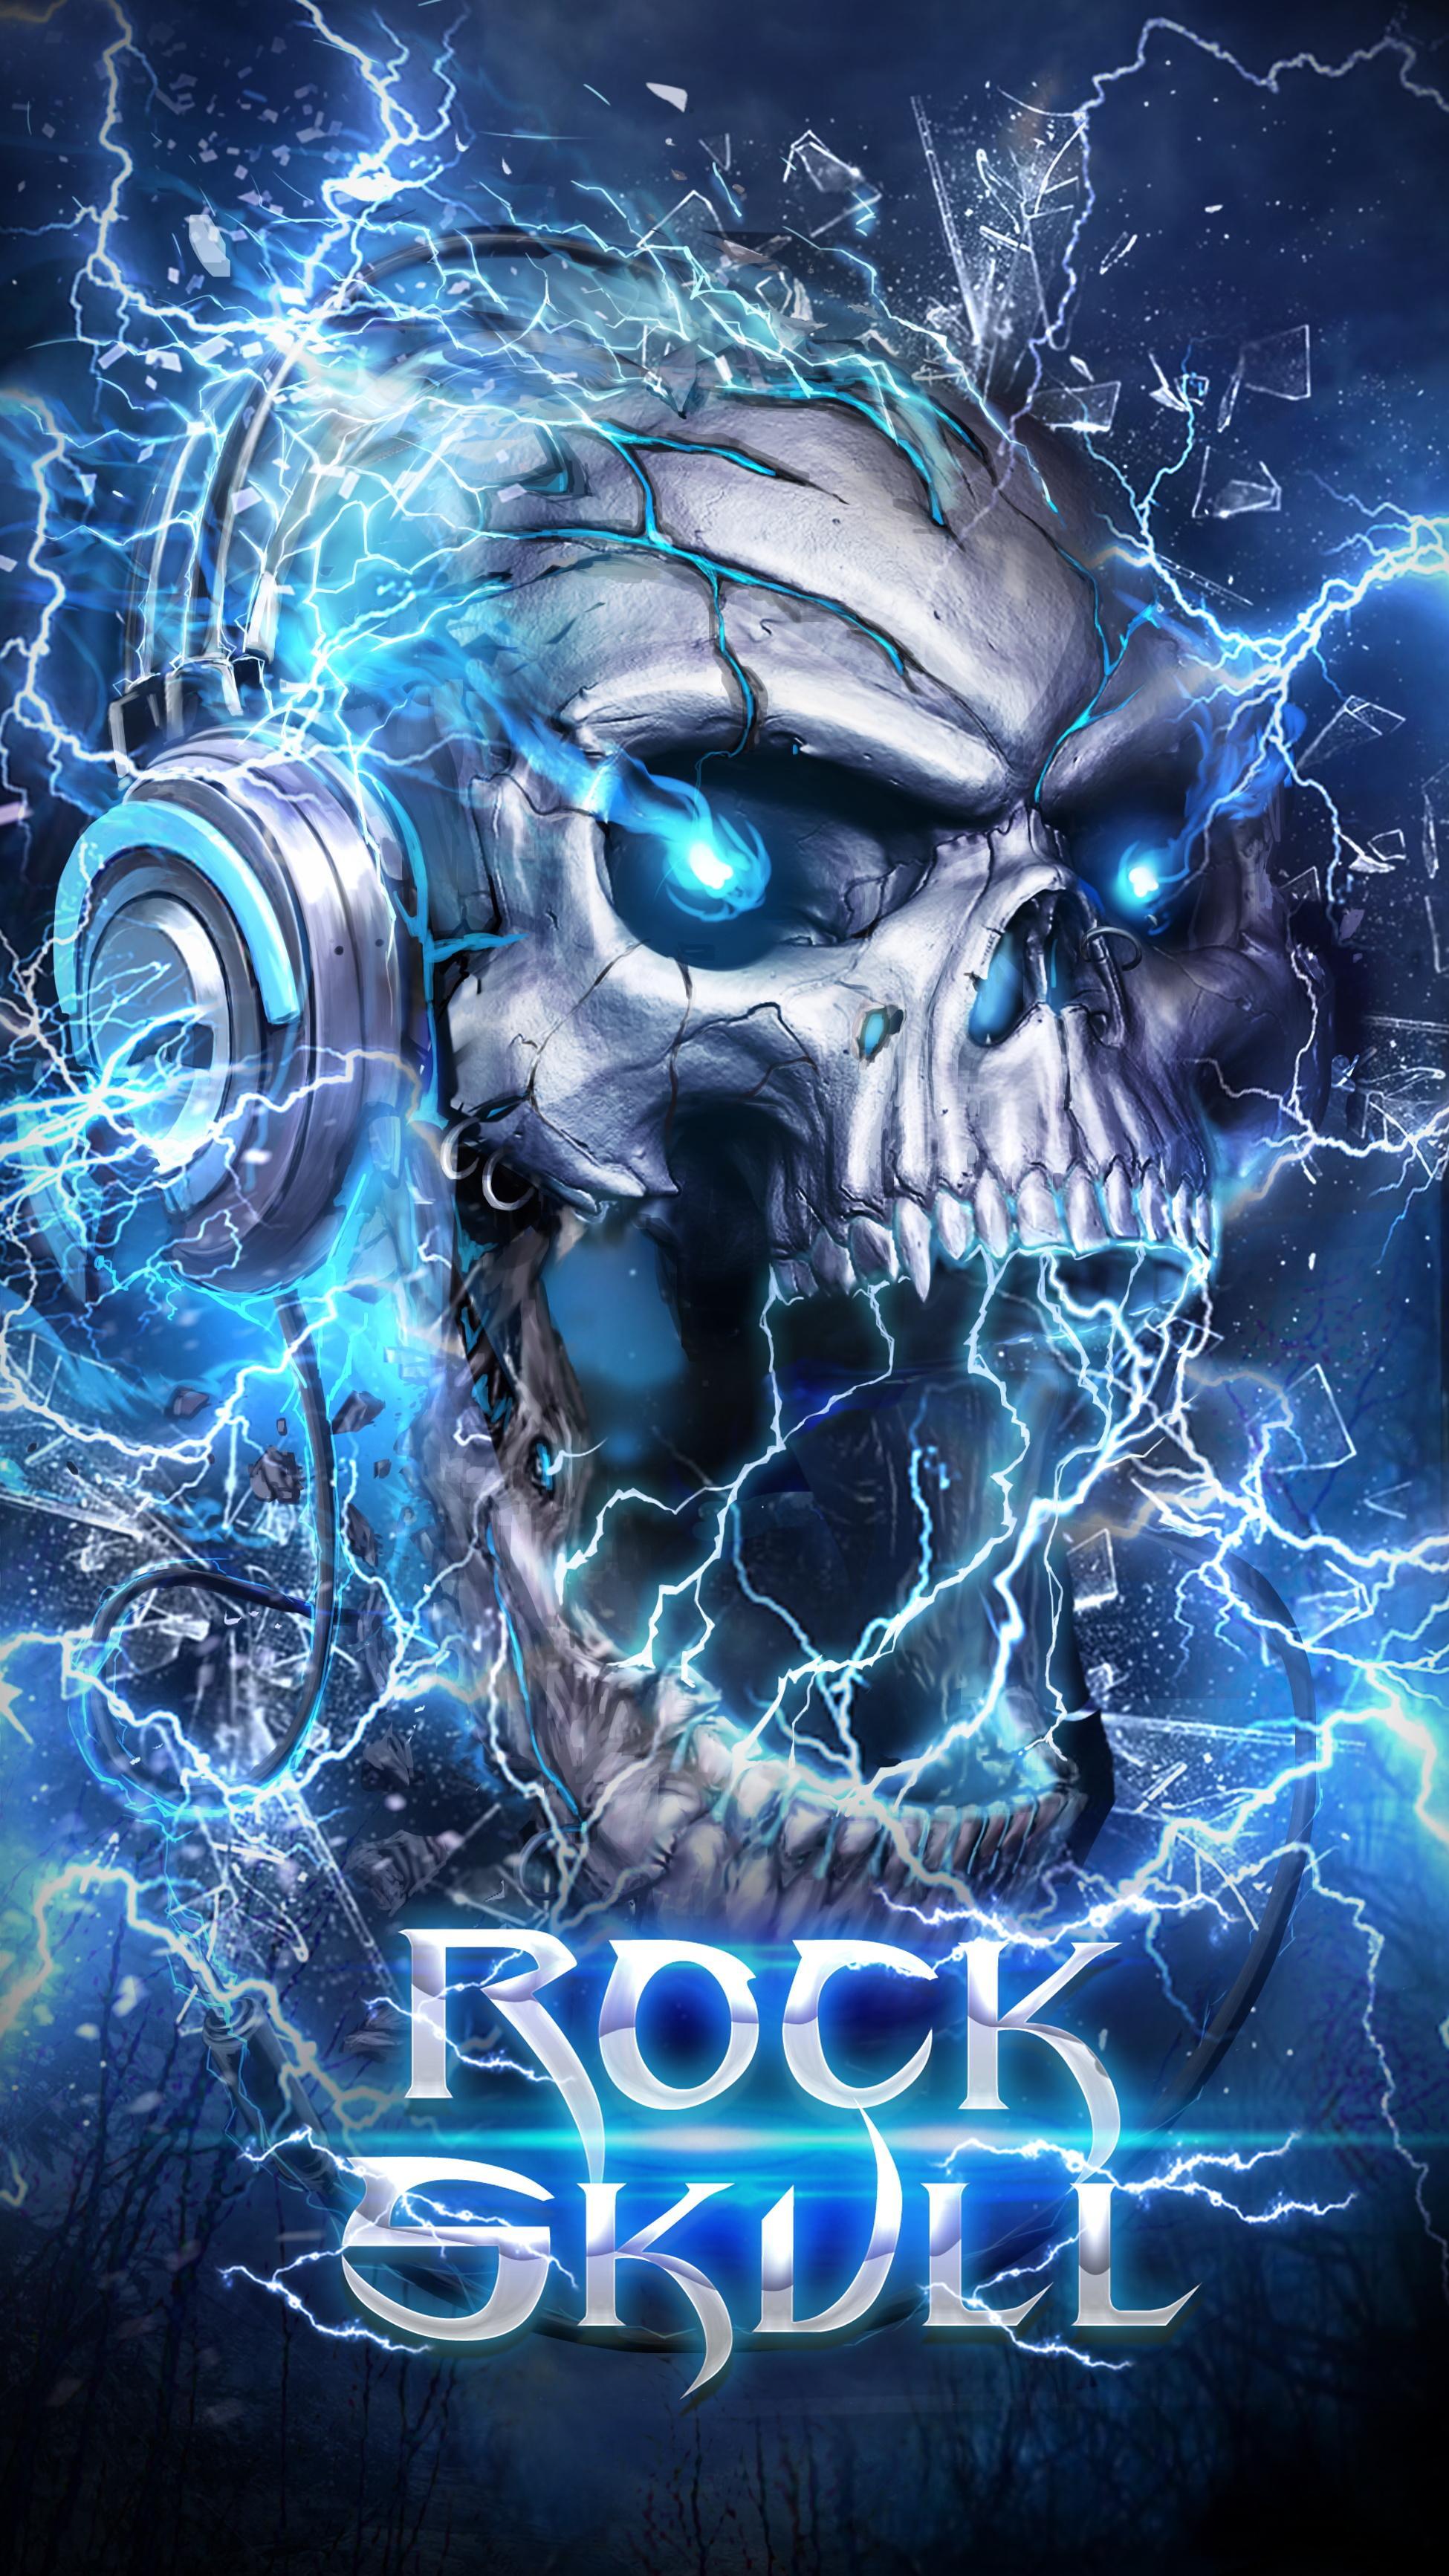 Electric Skull Live Wallpaper for Android